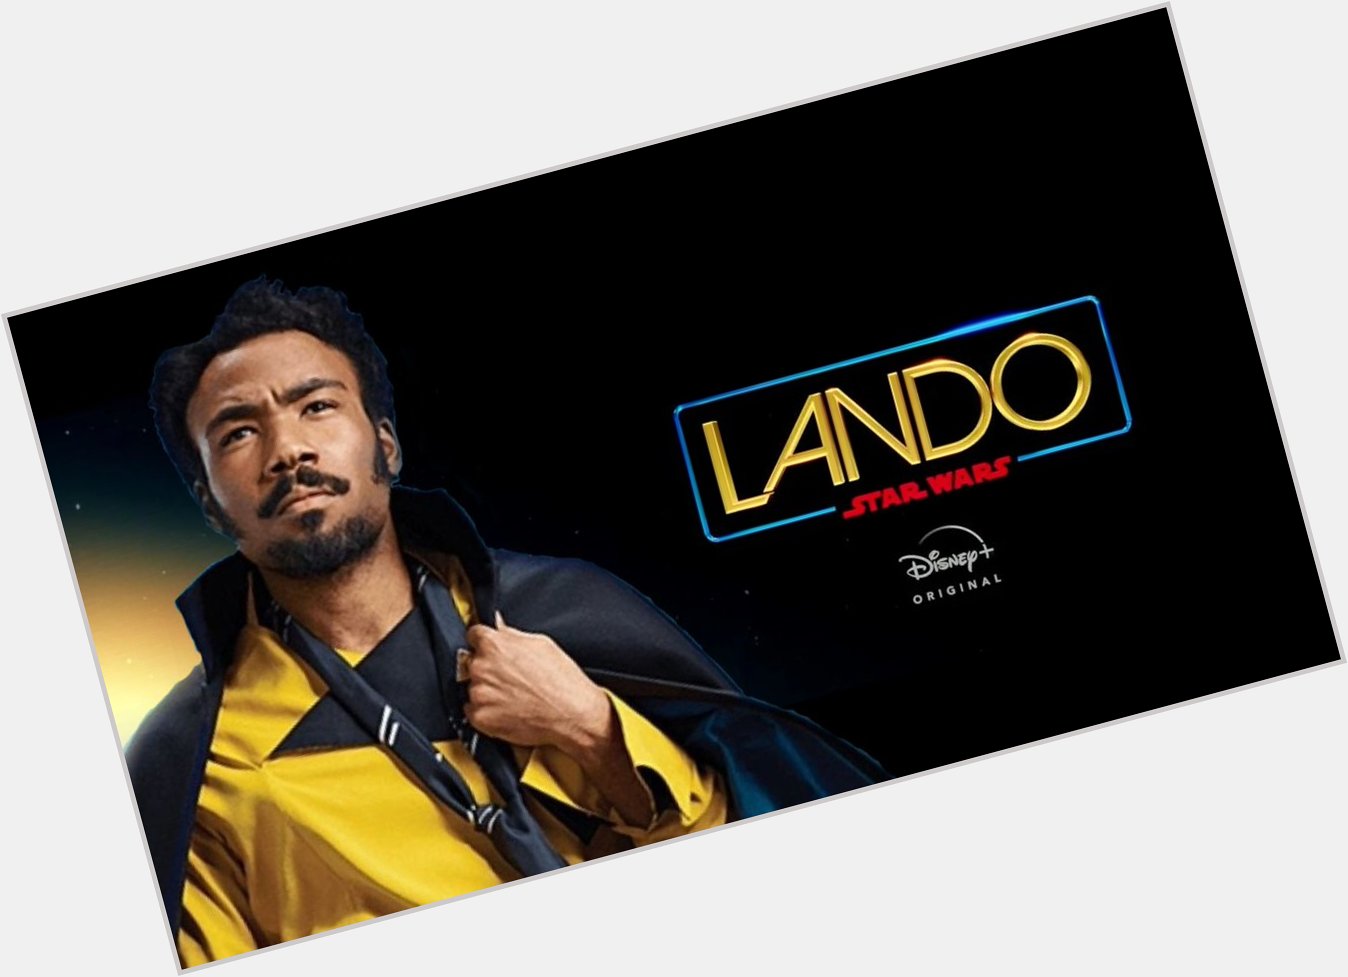 Happy Birthday Donald Glover Looking forward to your LANDO series! 